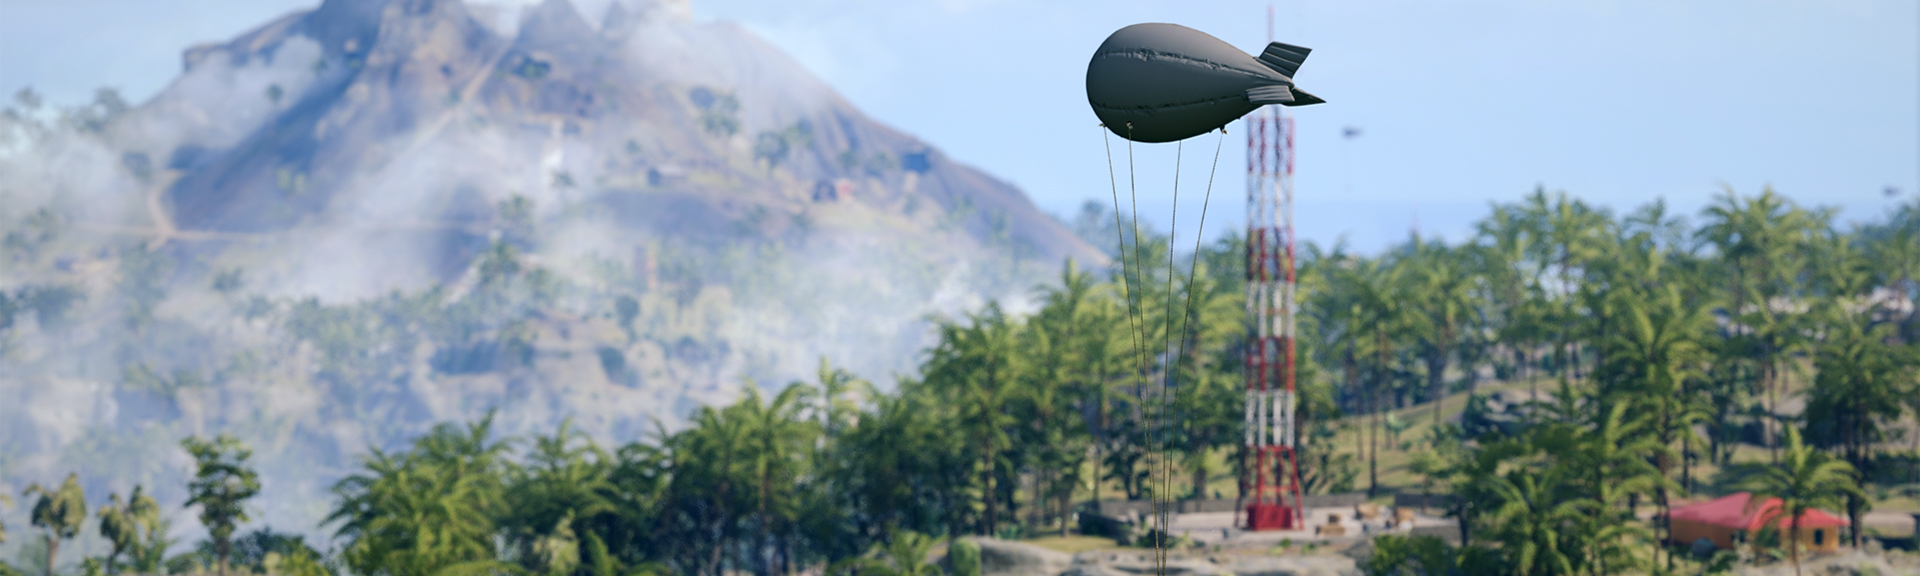 Image of deploy balloon